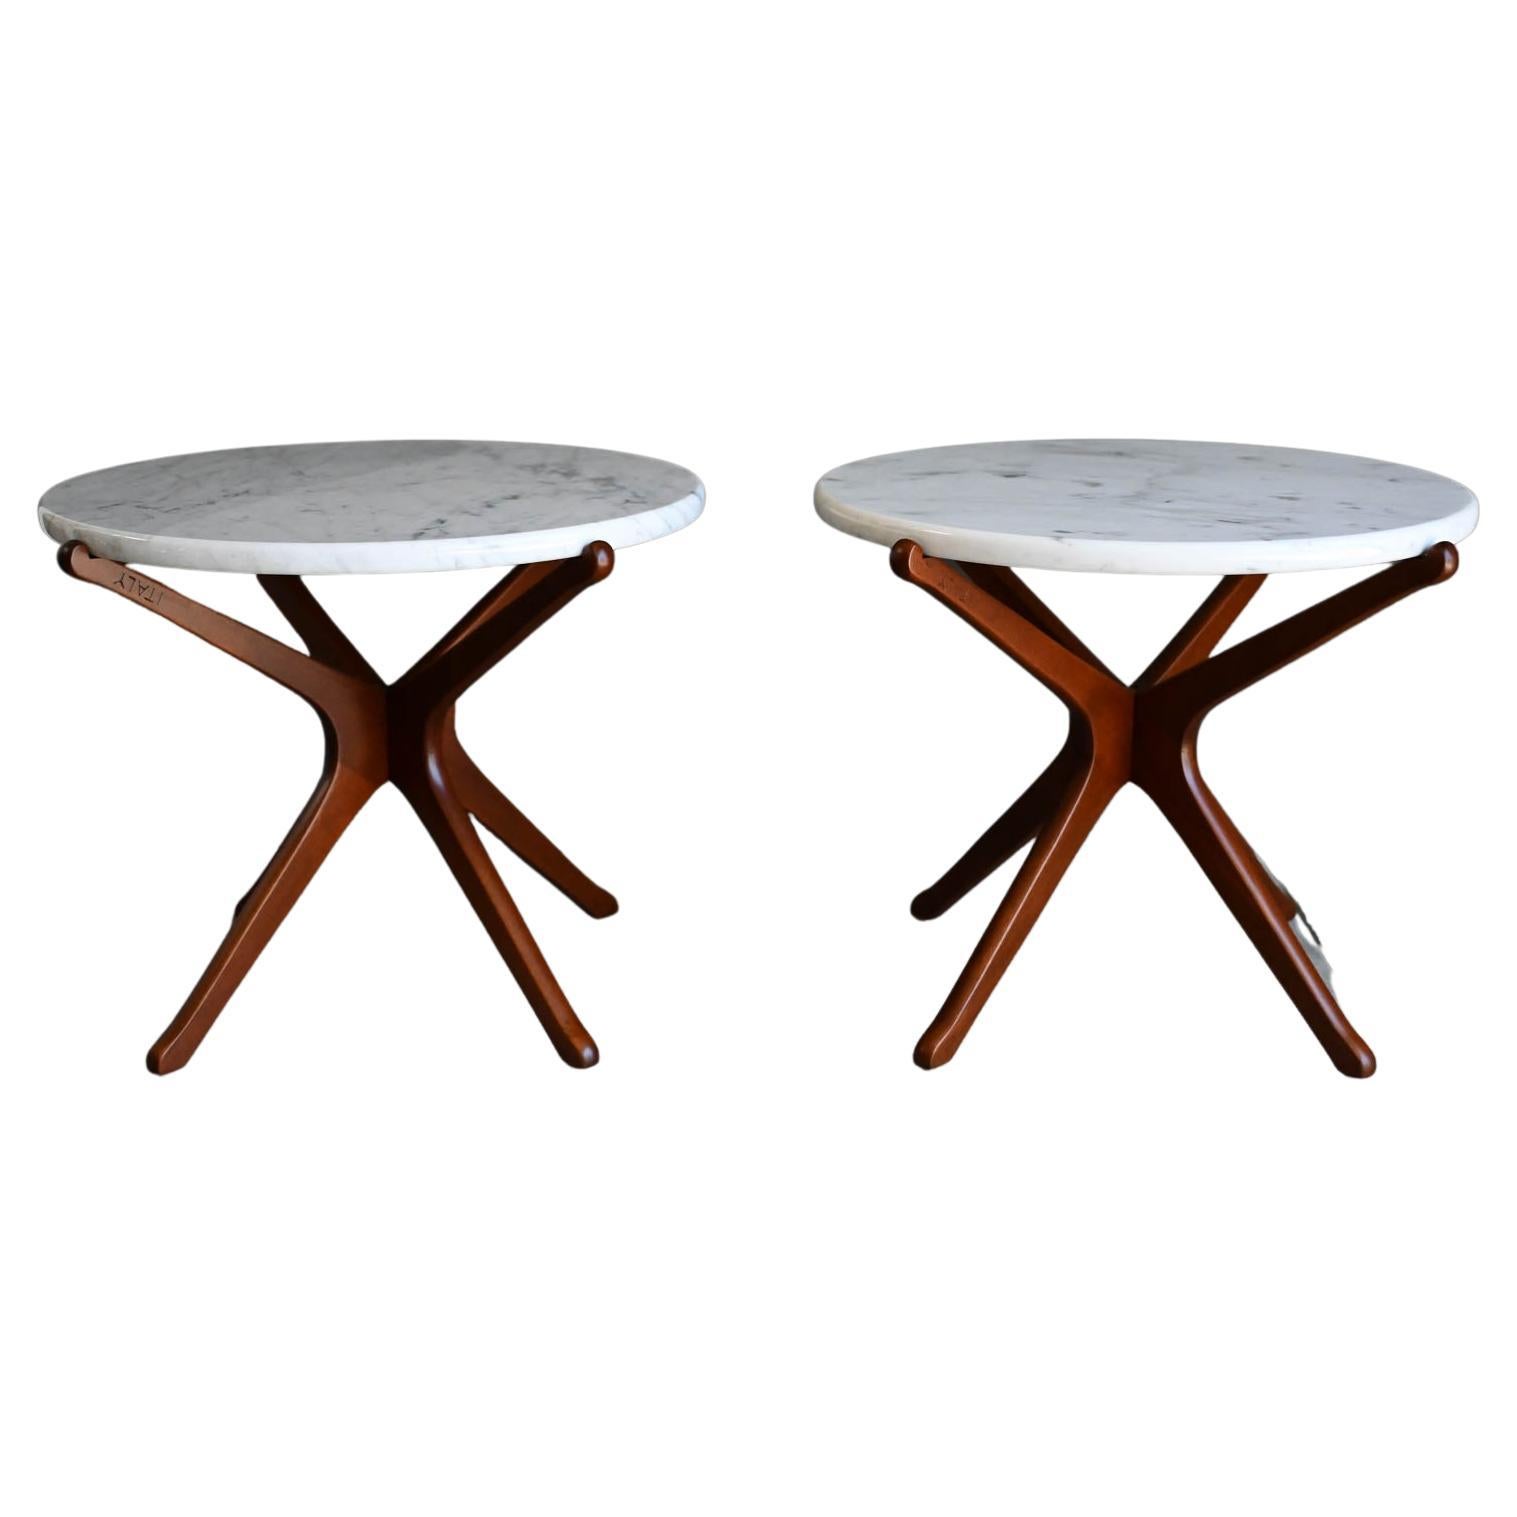 Pair of Ico Parisi Italian Walnut and Marble Side Tables, ca. 1960 For Sale